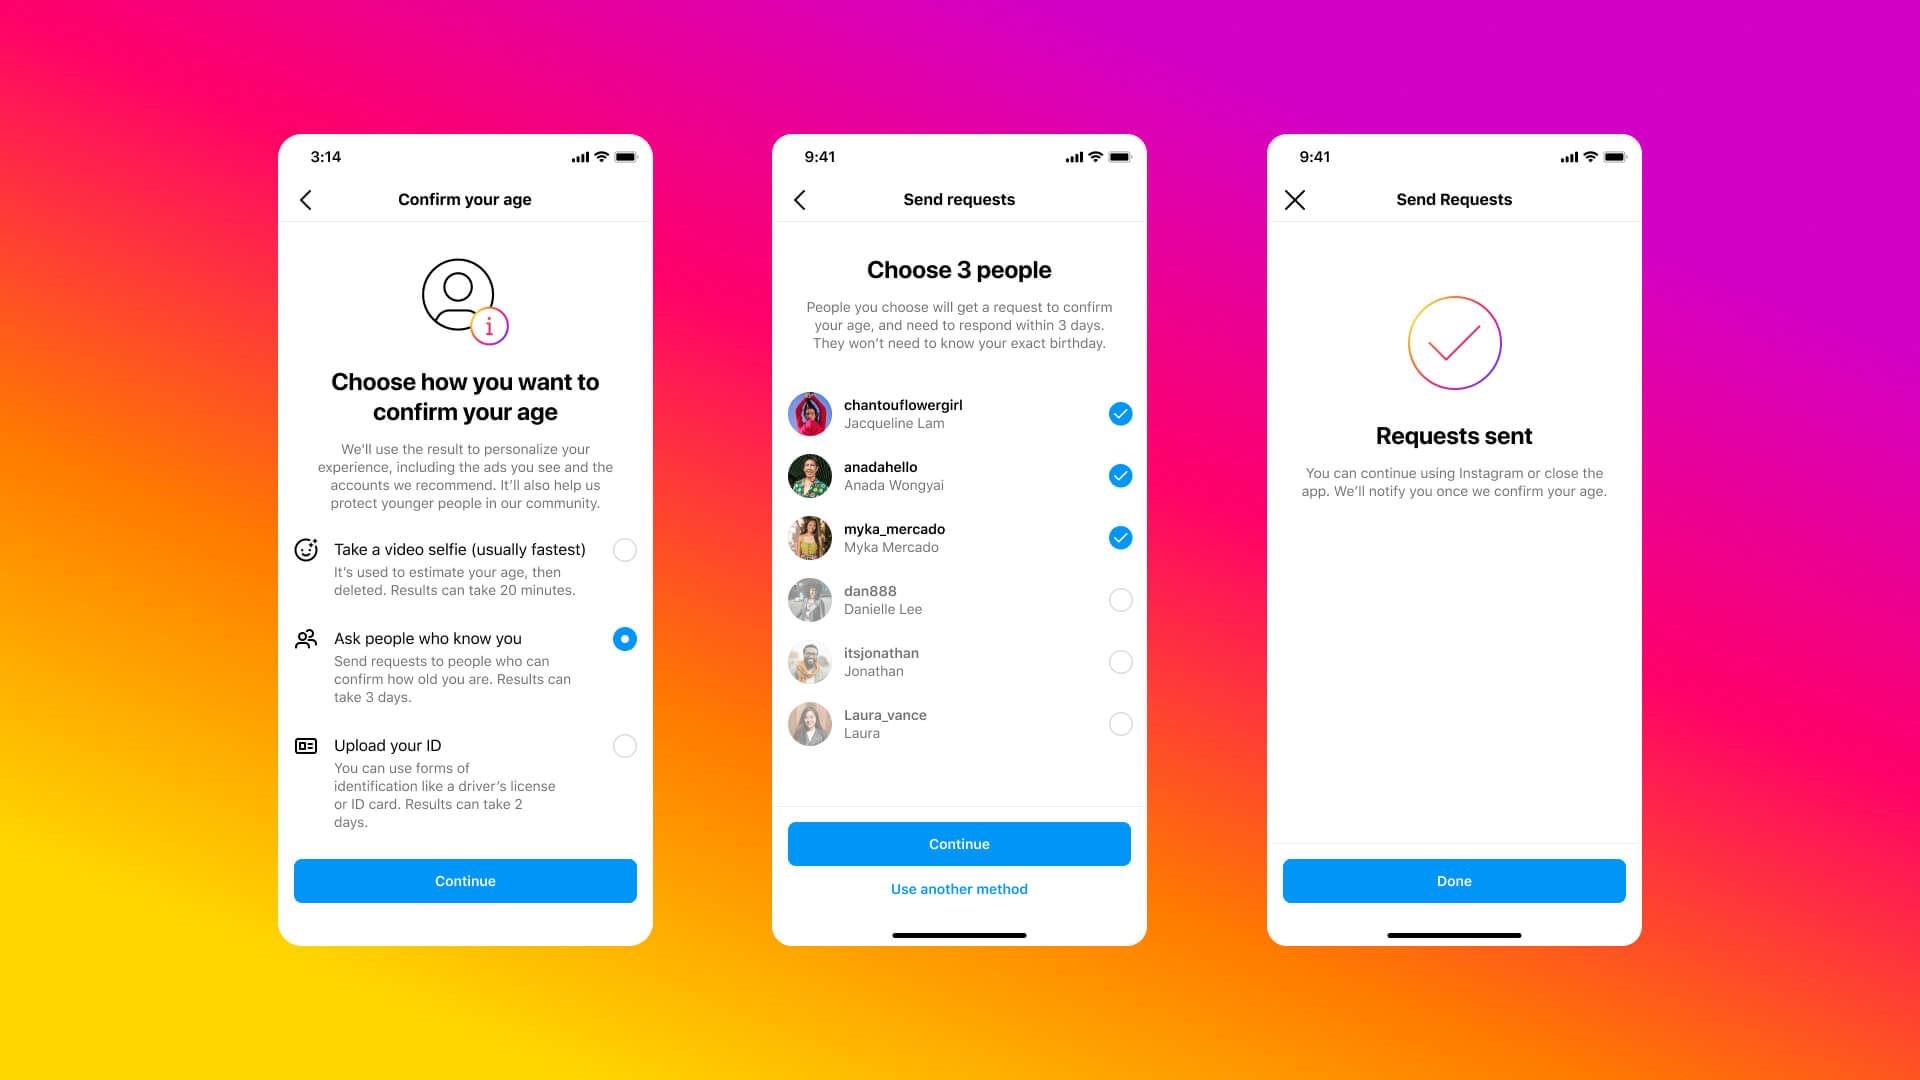 Rather than a video selfie, users can nominate friends to vouch for them and their age (Instagram)